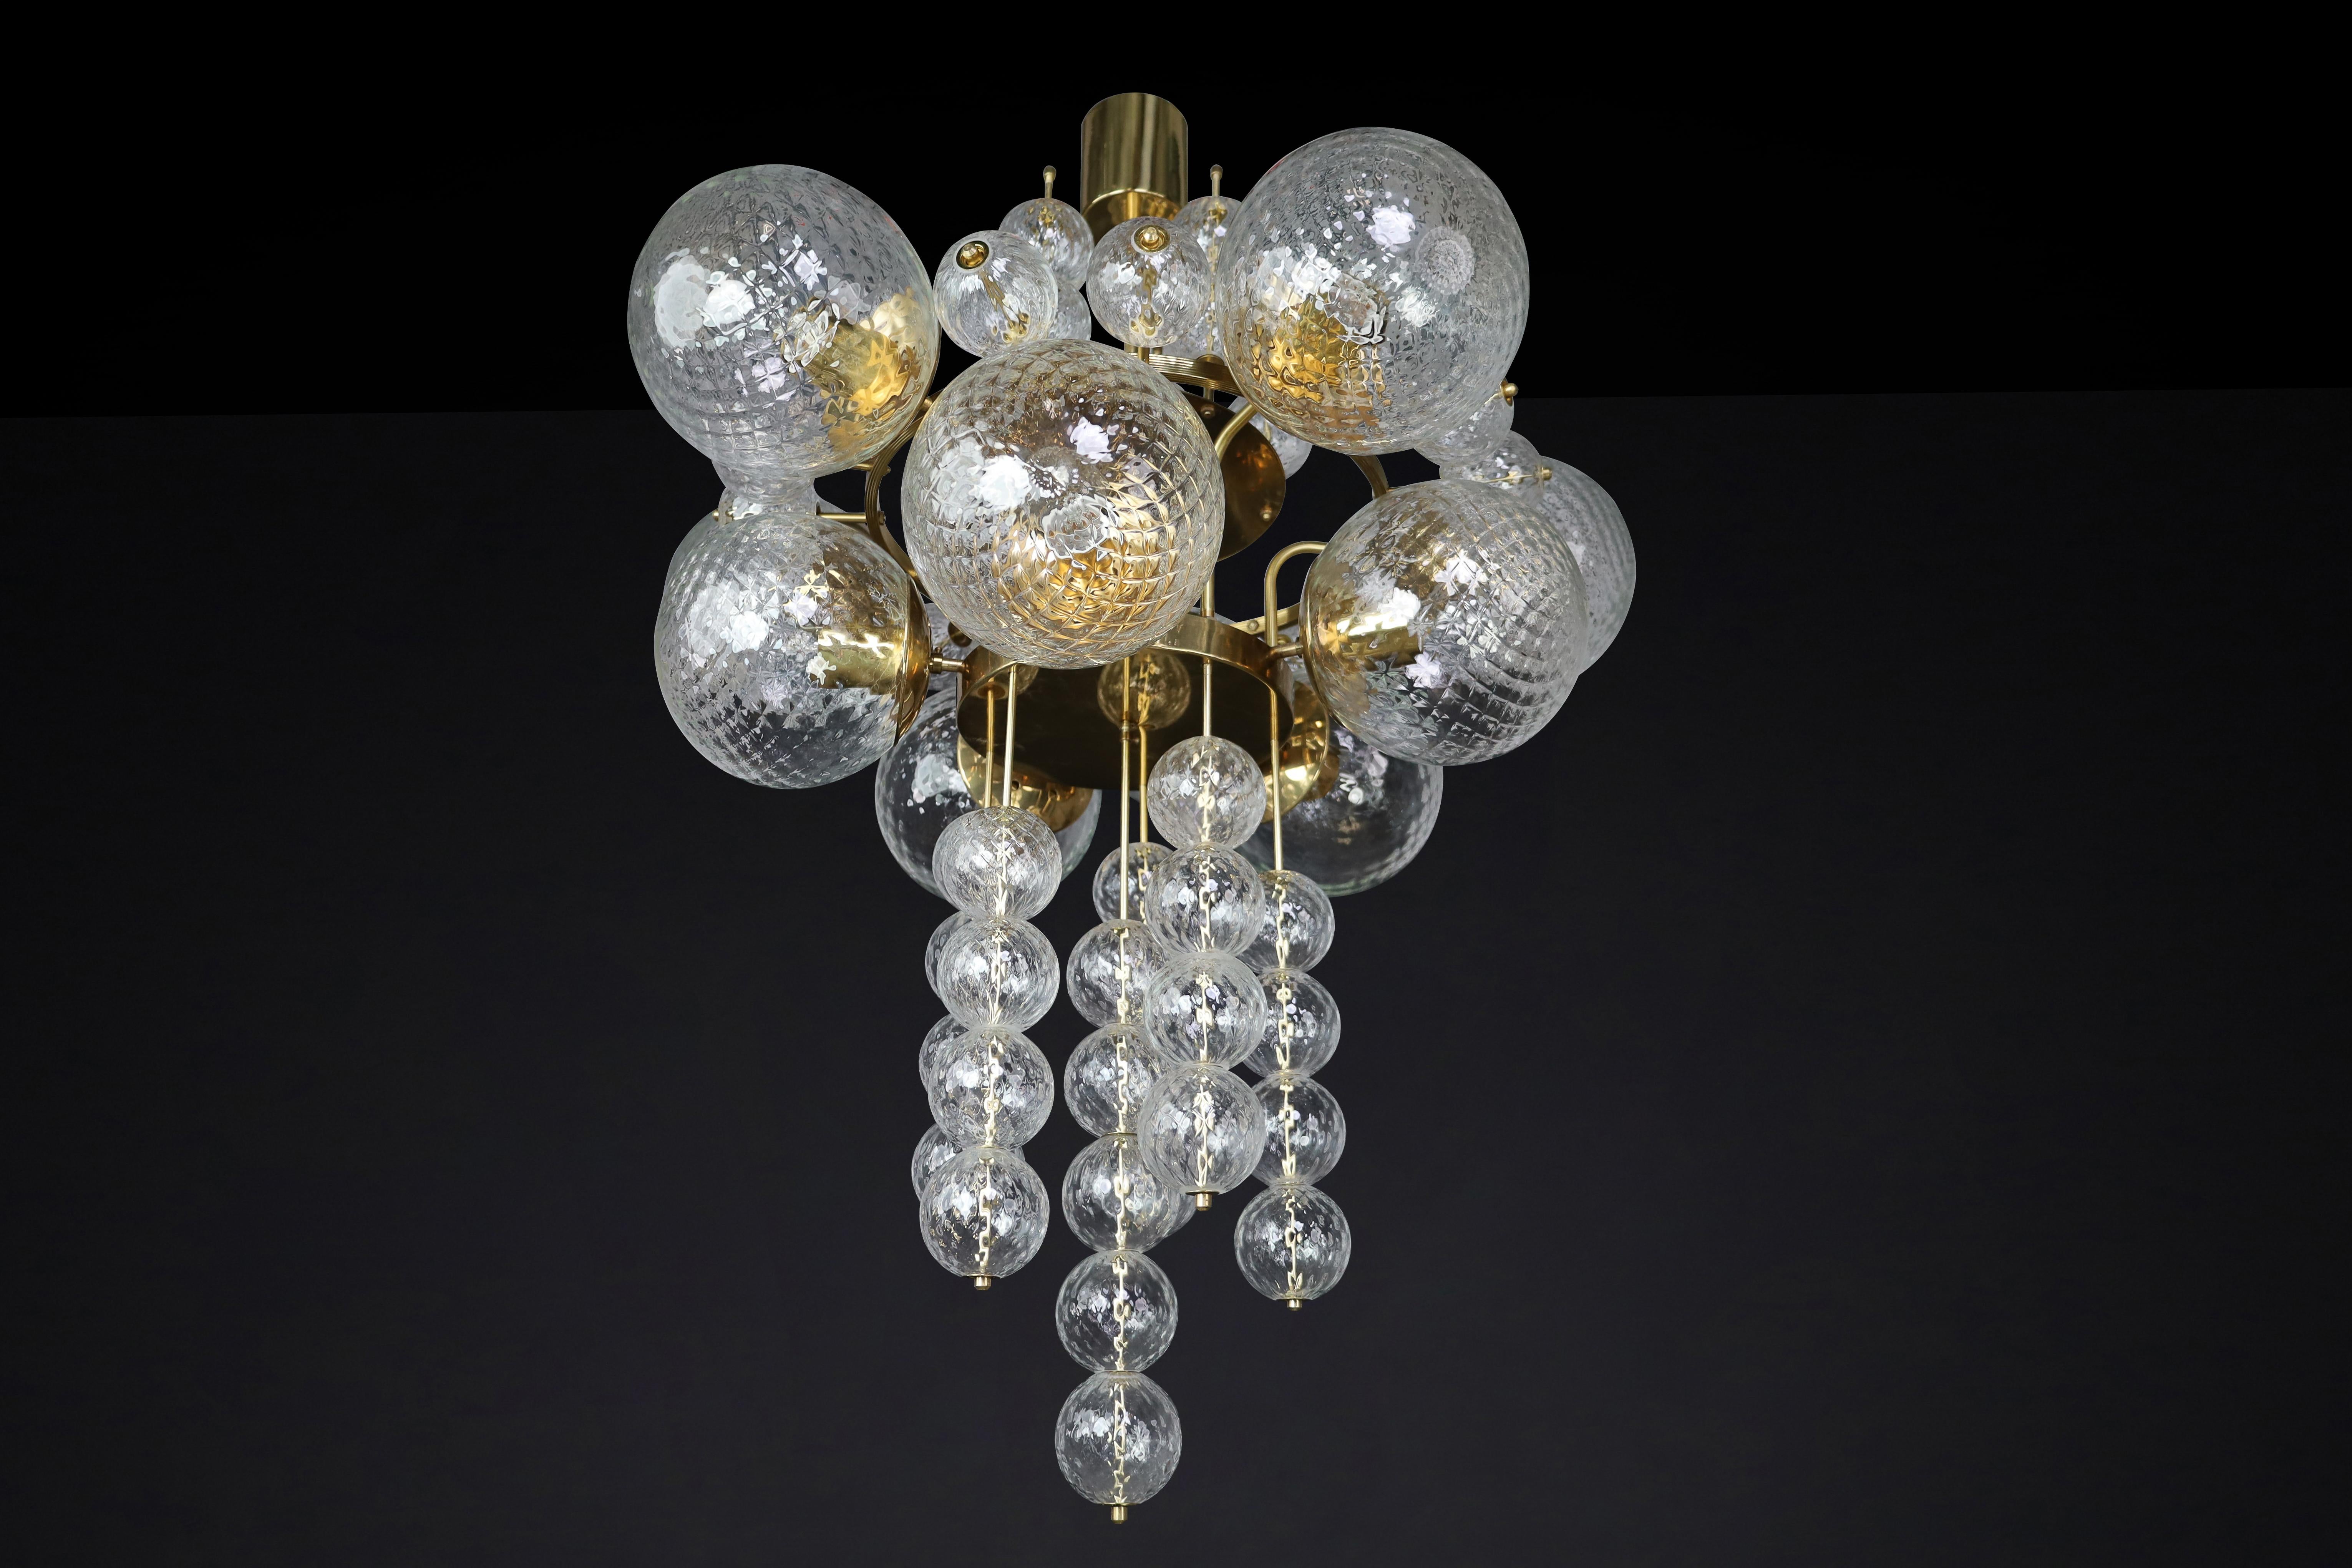 Mid-Century Modern Large Chandelier with brass fixture and hand-blowed glass globes by Preciosa Cz. For Sale